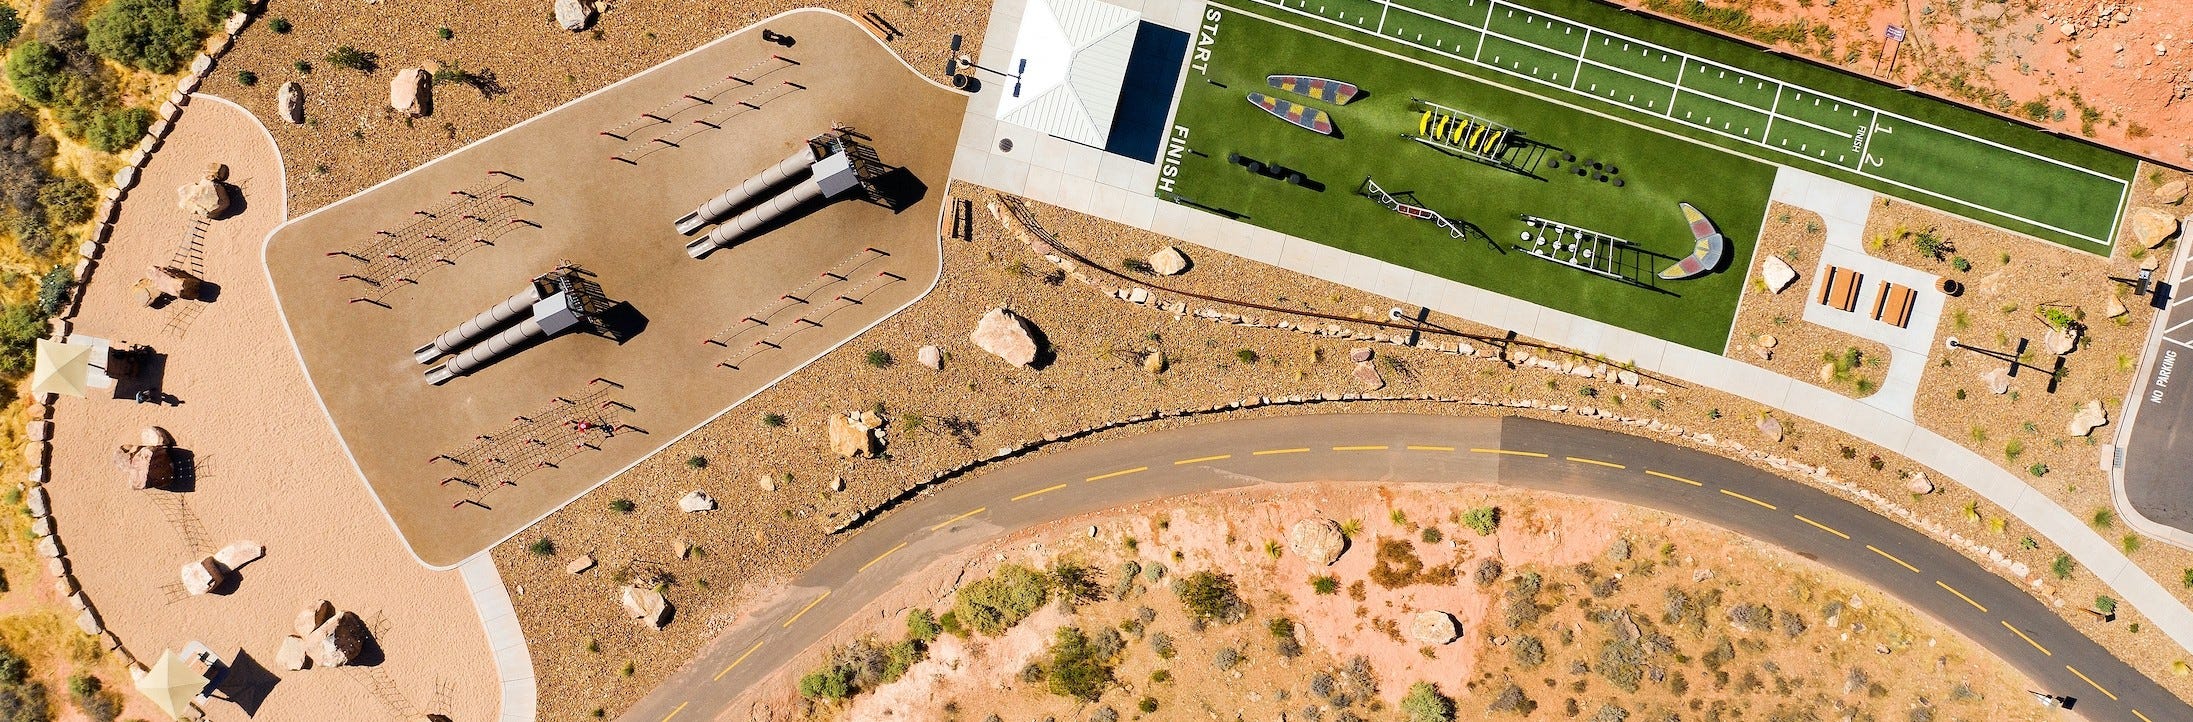 GameTime Brings Custom Play and Outdoor Fitness to Southern Utah